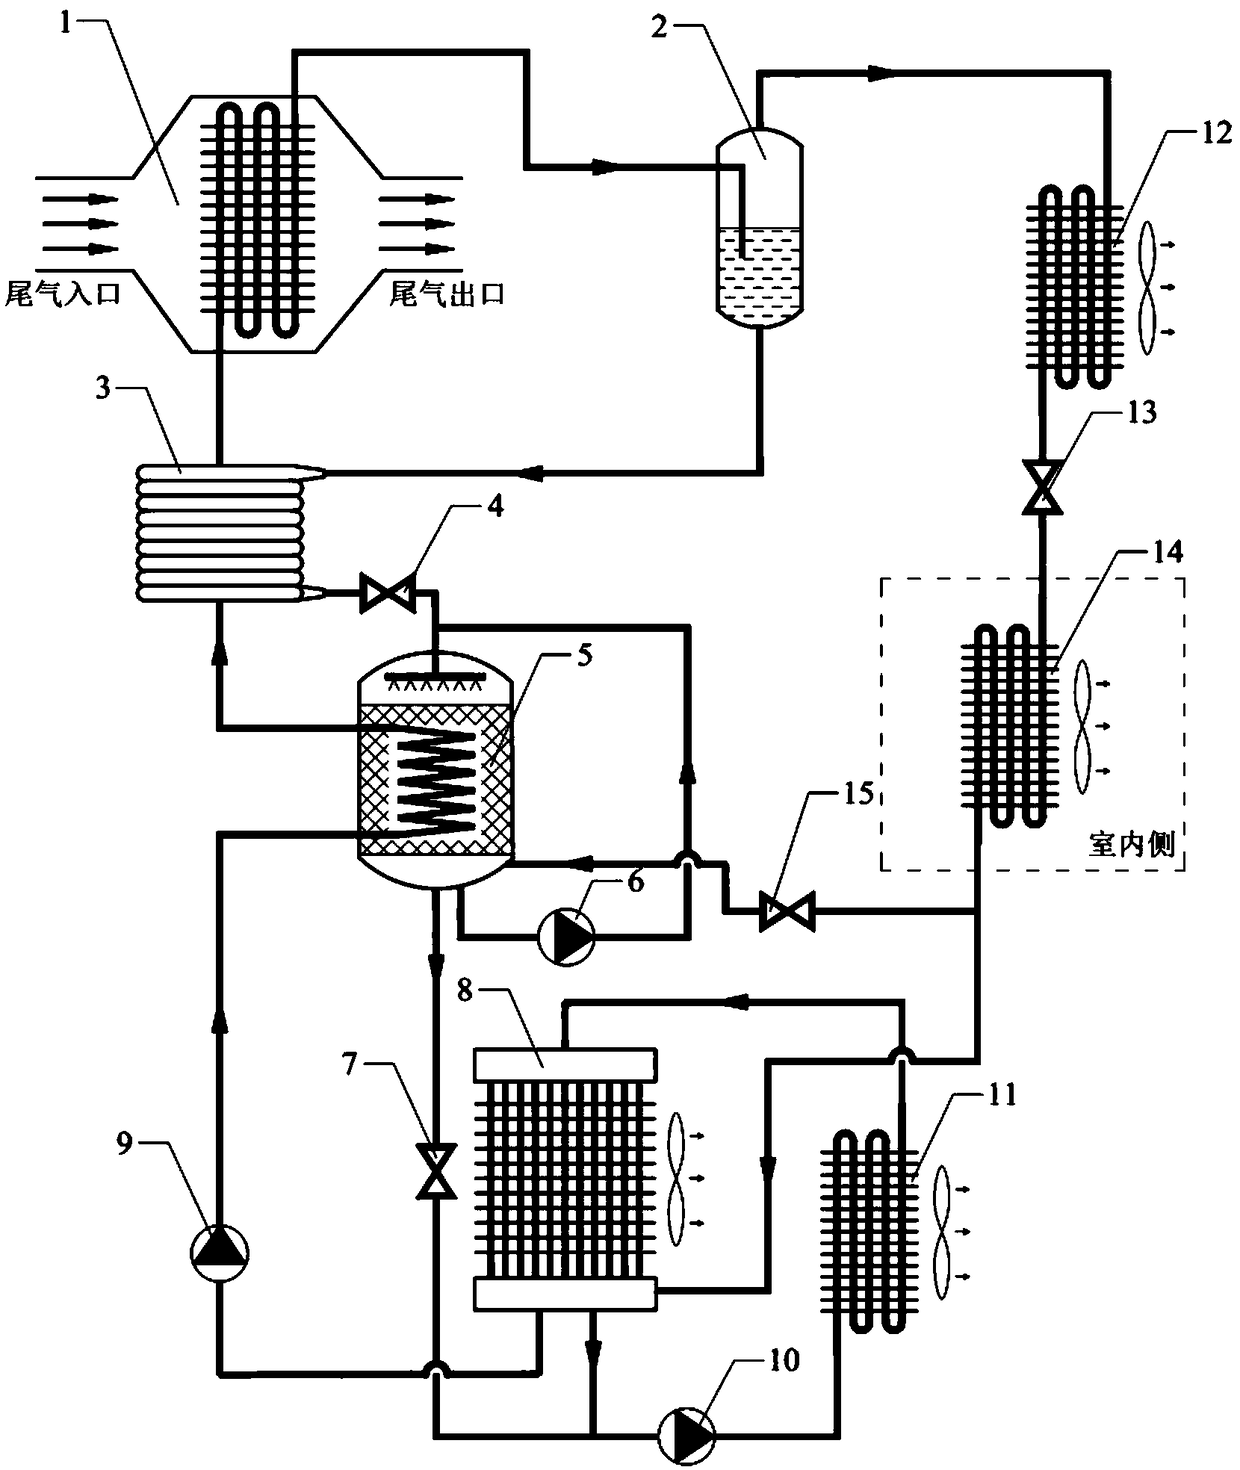 Vehicle-mounted absorption-type air conditioning system based on exhaust driving